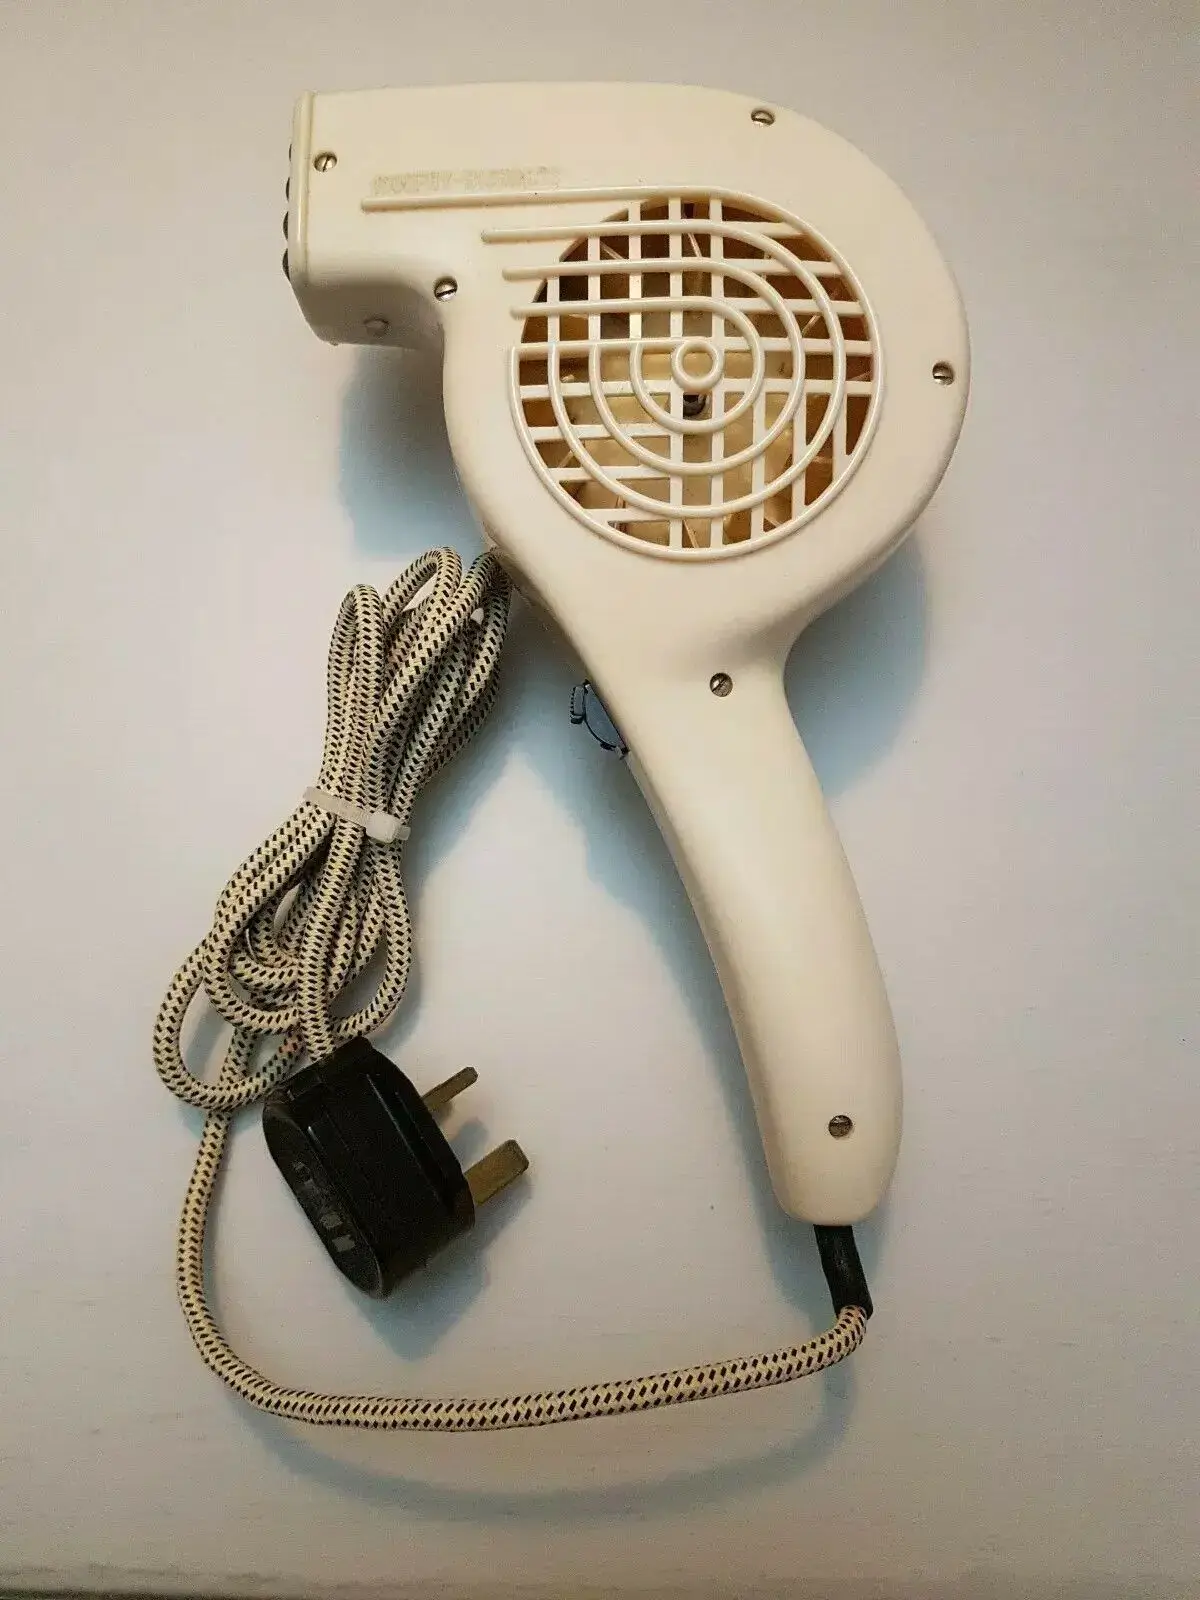 Vintage hair dryer with woven cord on a table.